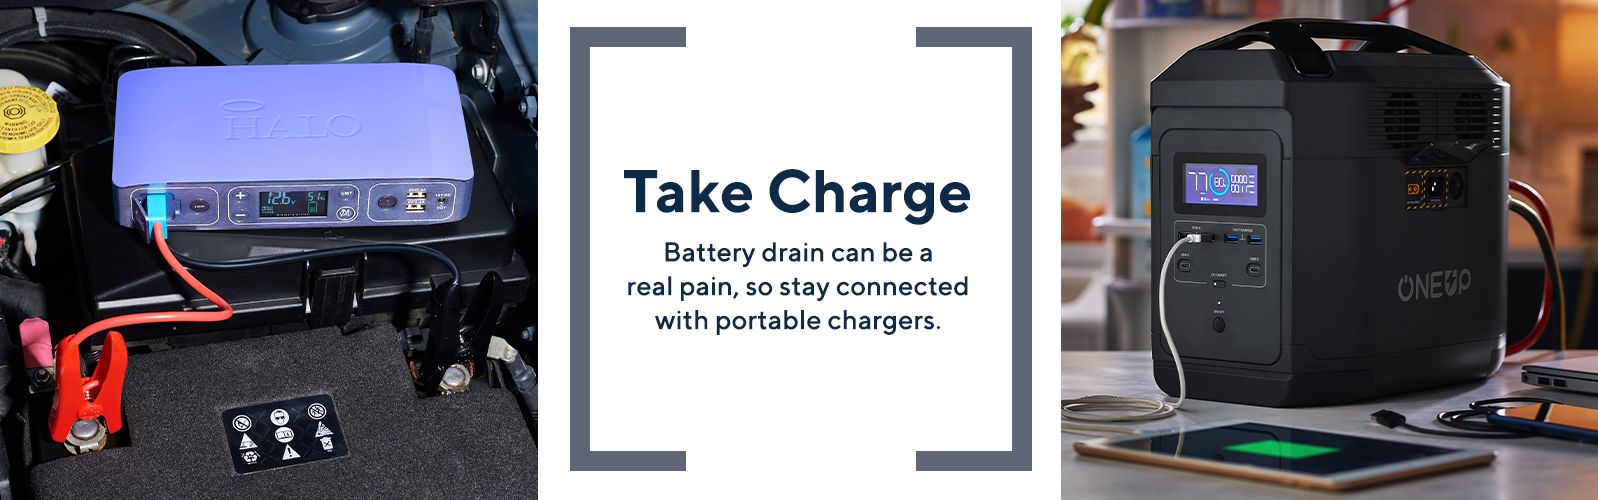 Take Charge Battery drain can be a real pain, so stay connected with portable chargers. 